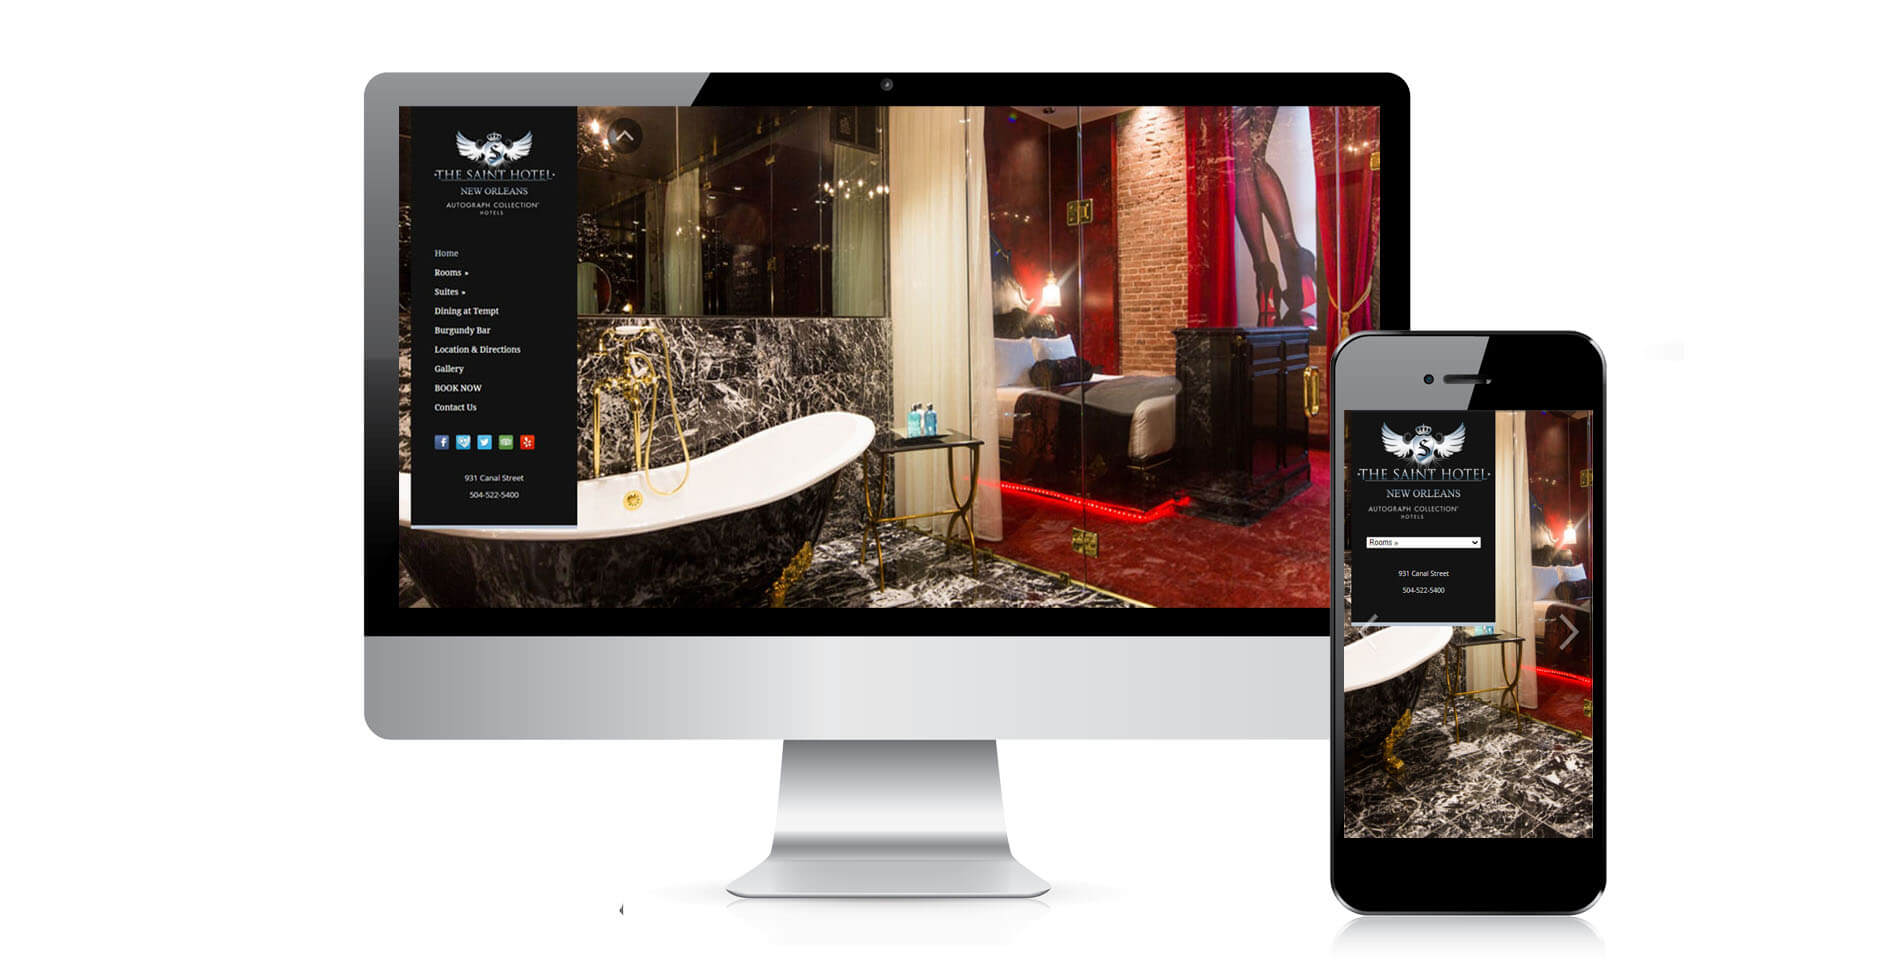 An image of the responsive design of Saint Hotel New Orleans, website created by Not Fade Away Marketing